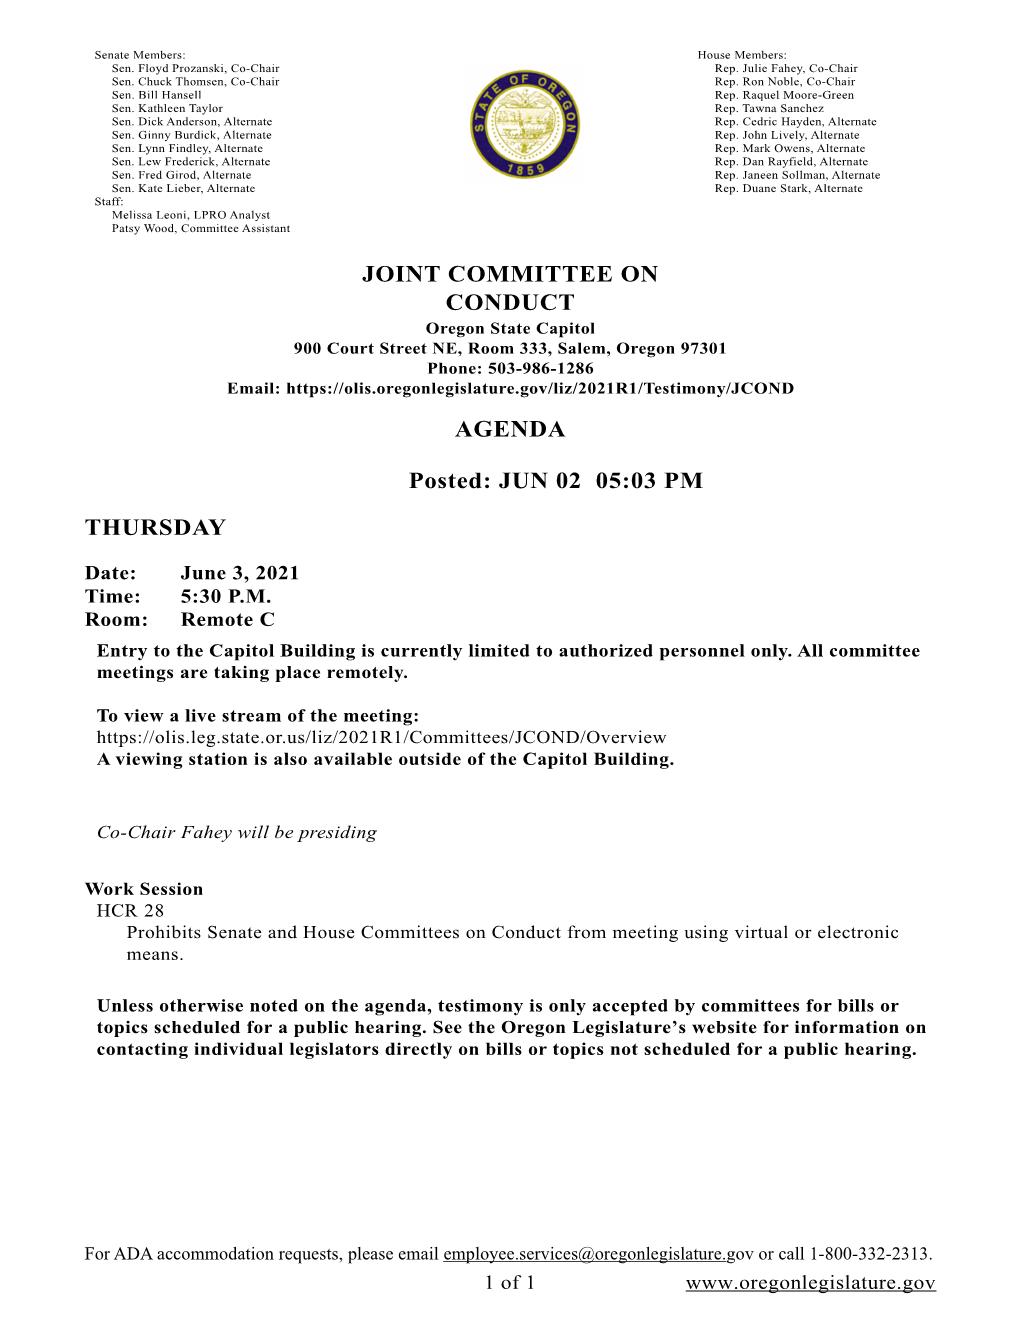 JOINT COMMITTEE on CONDUCT AGENDA Posted: JUN 02 05:03 PM